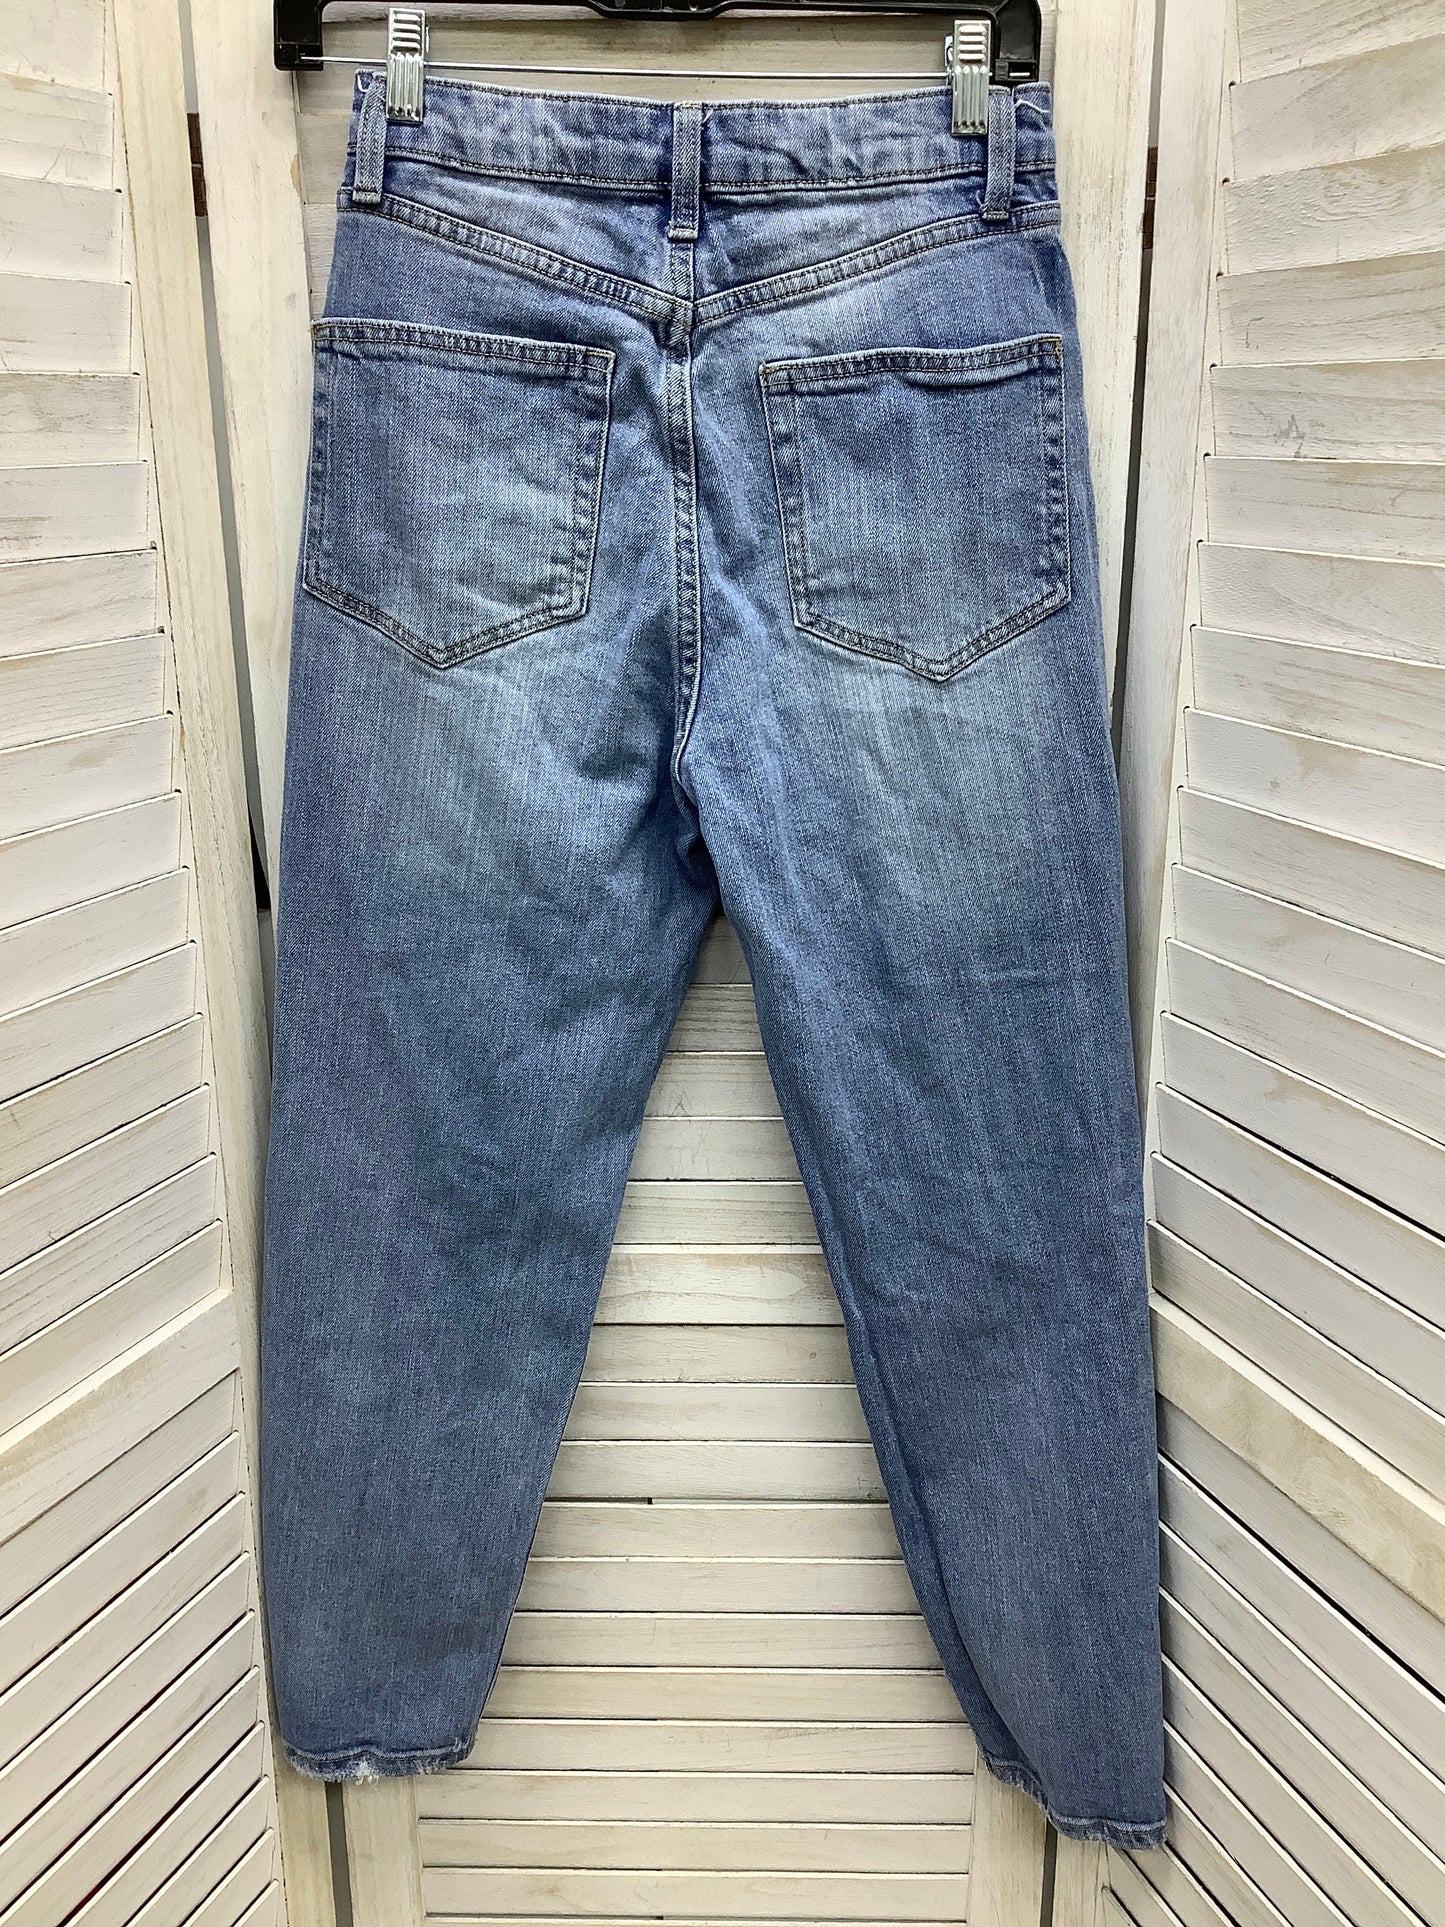 Blue Denim Jeans Straight Wild Fable, Size 2